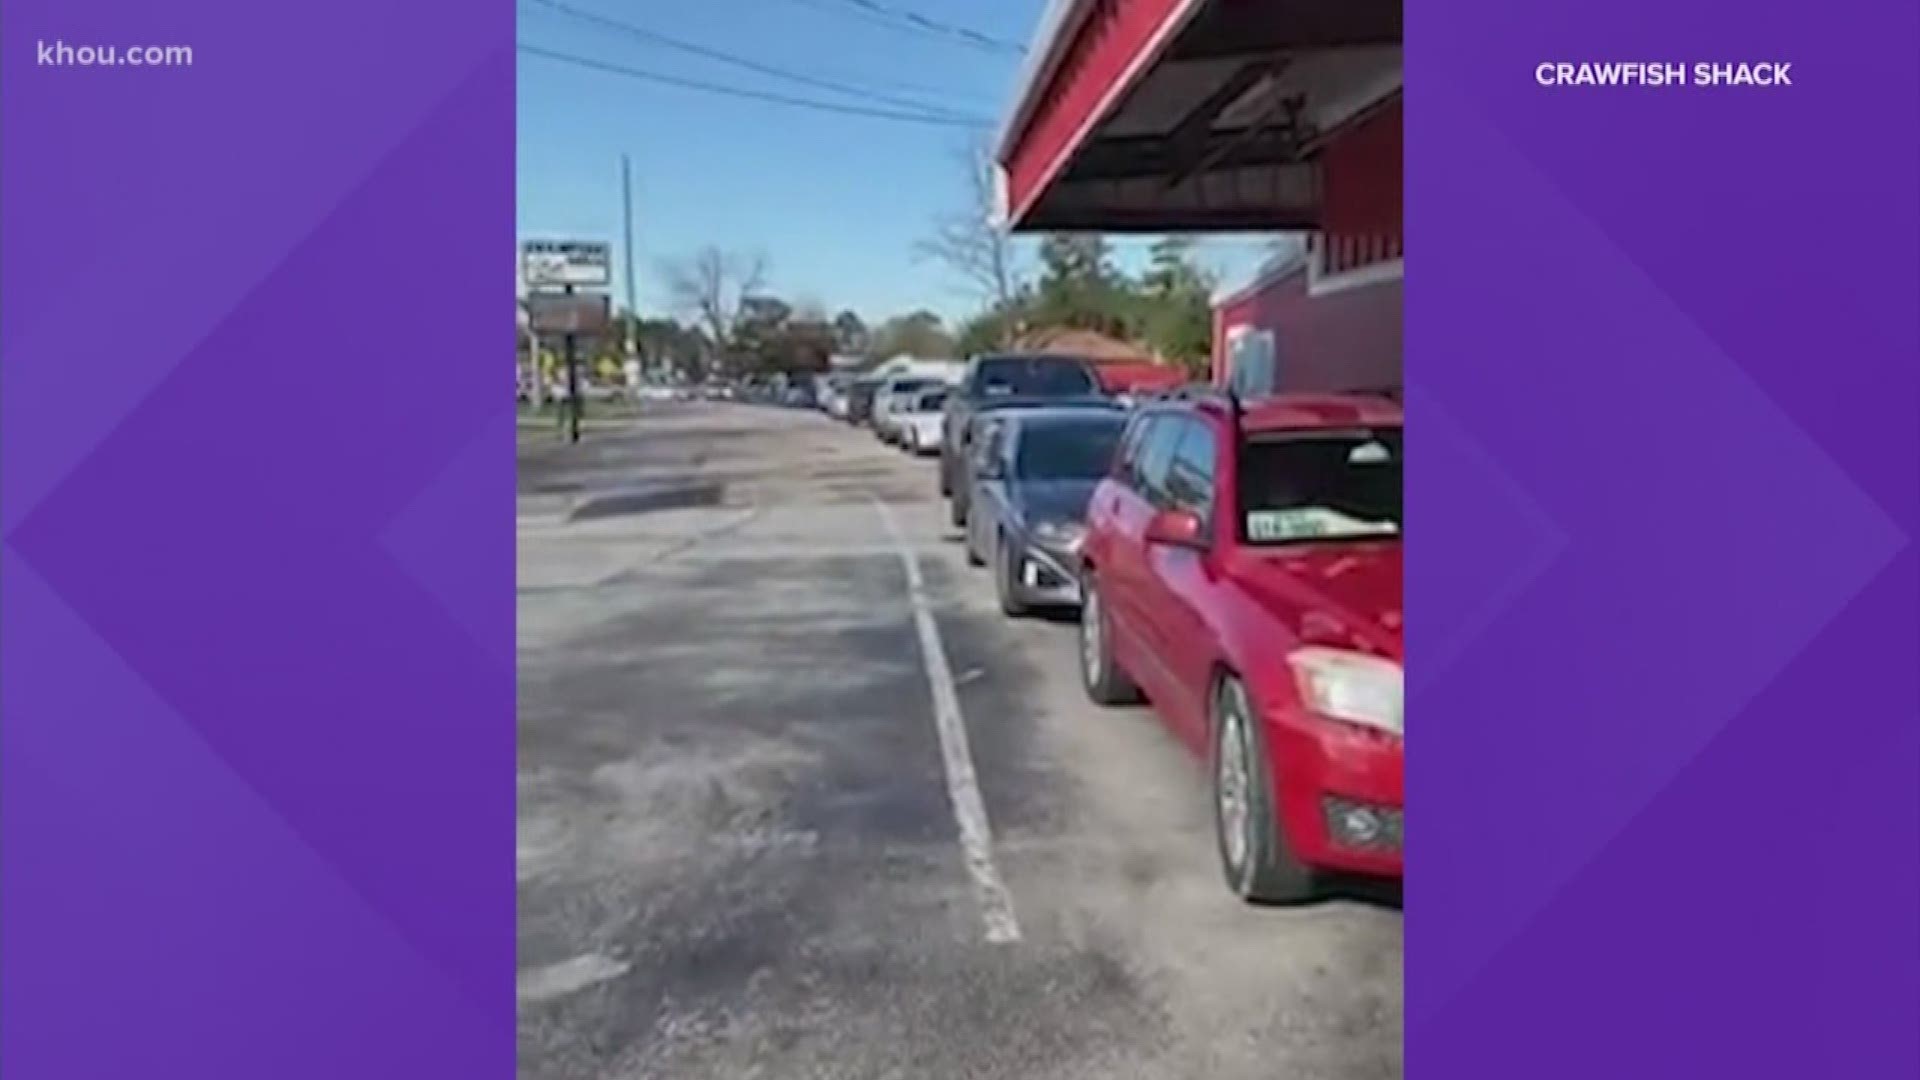 The famed Crawfish Shack in the 5800 block of FM 2100 opened for drive-thru customers Friday.